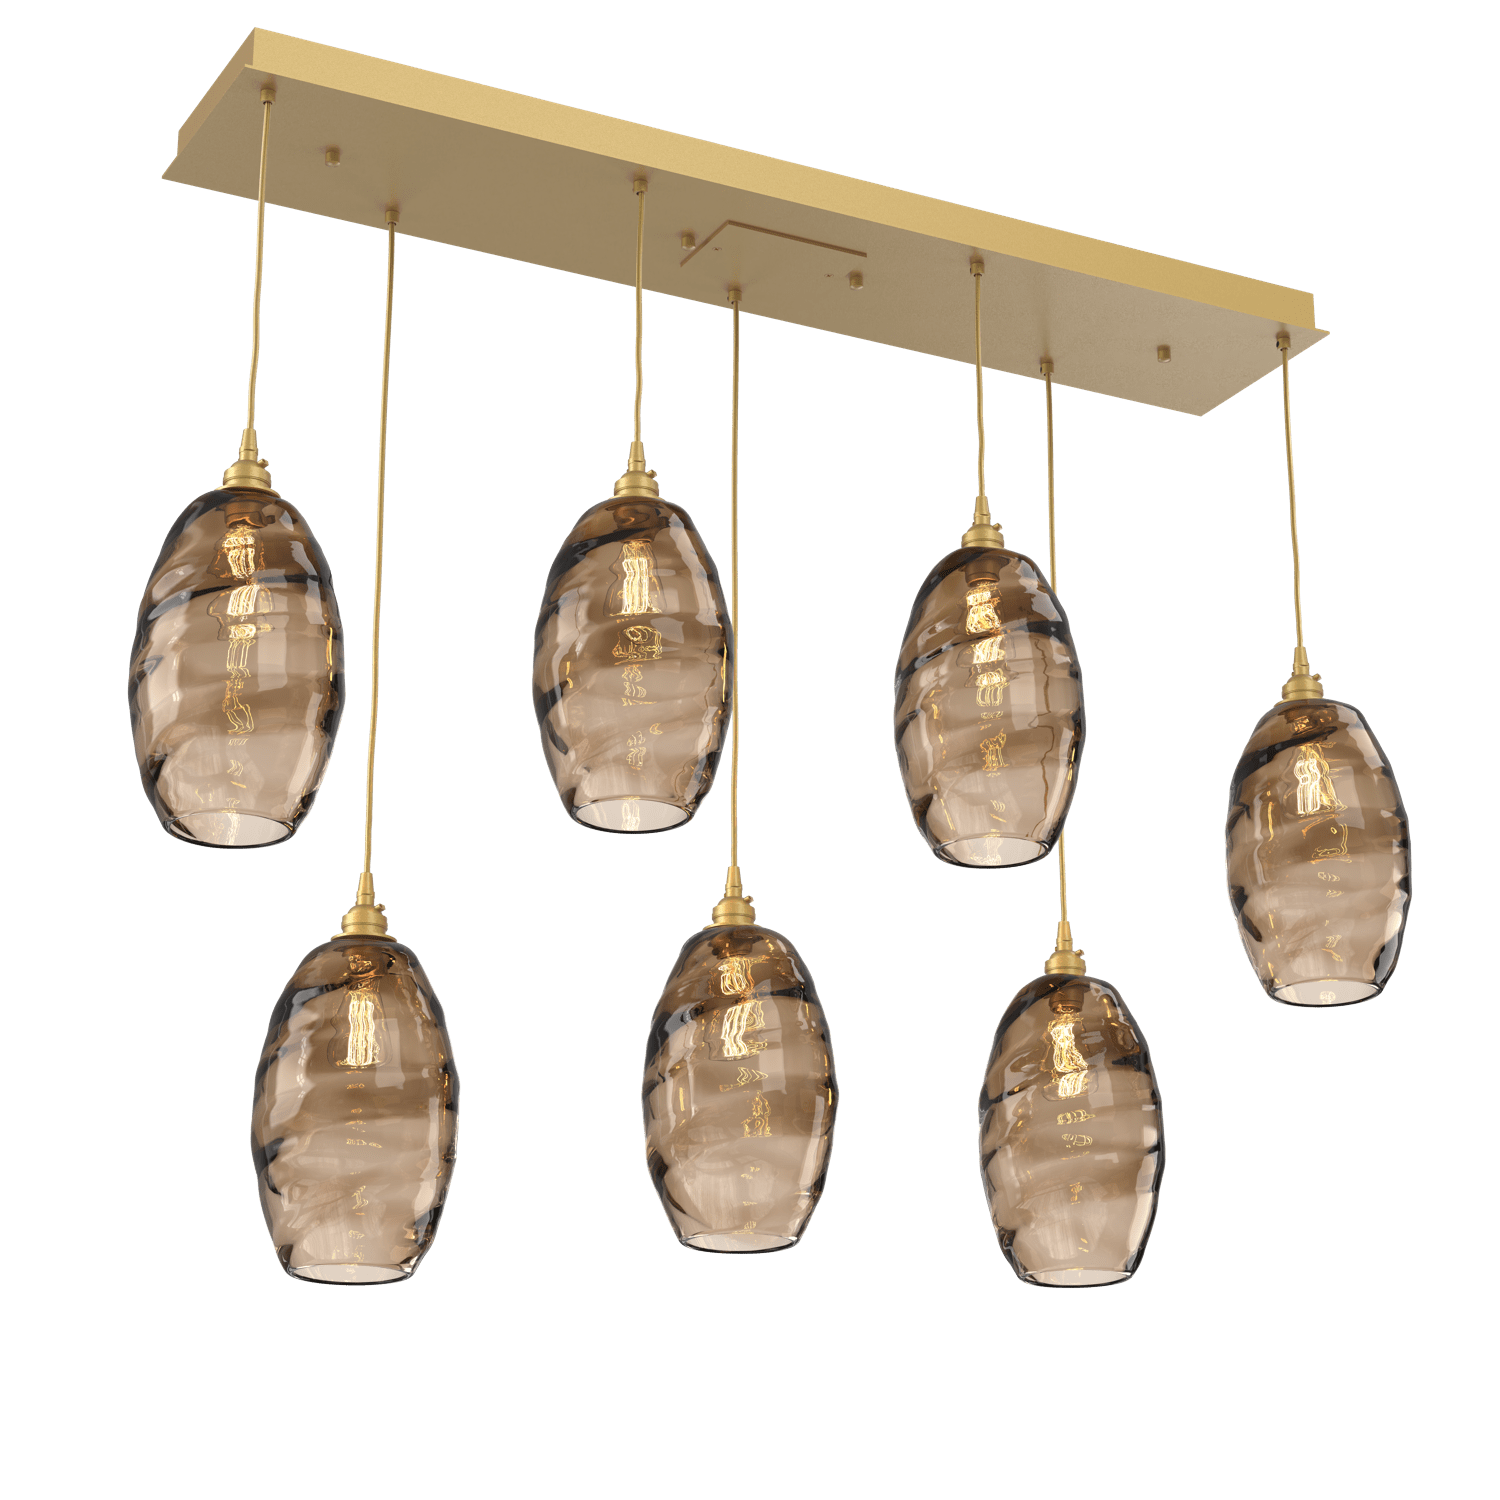 PLB0035-07-GB-OB-Hammerton-Studio-Optic-Blown-Glass-Elisse-7-light-linear-pendant-chandelier-with-gilded-brass-finish-and-optic-bronze-blown-glass-shades-and-incandescent-lamping